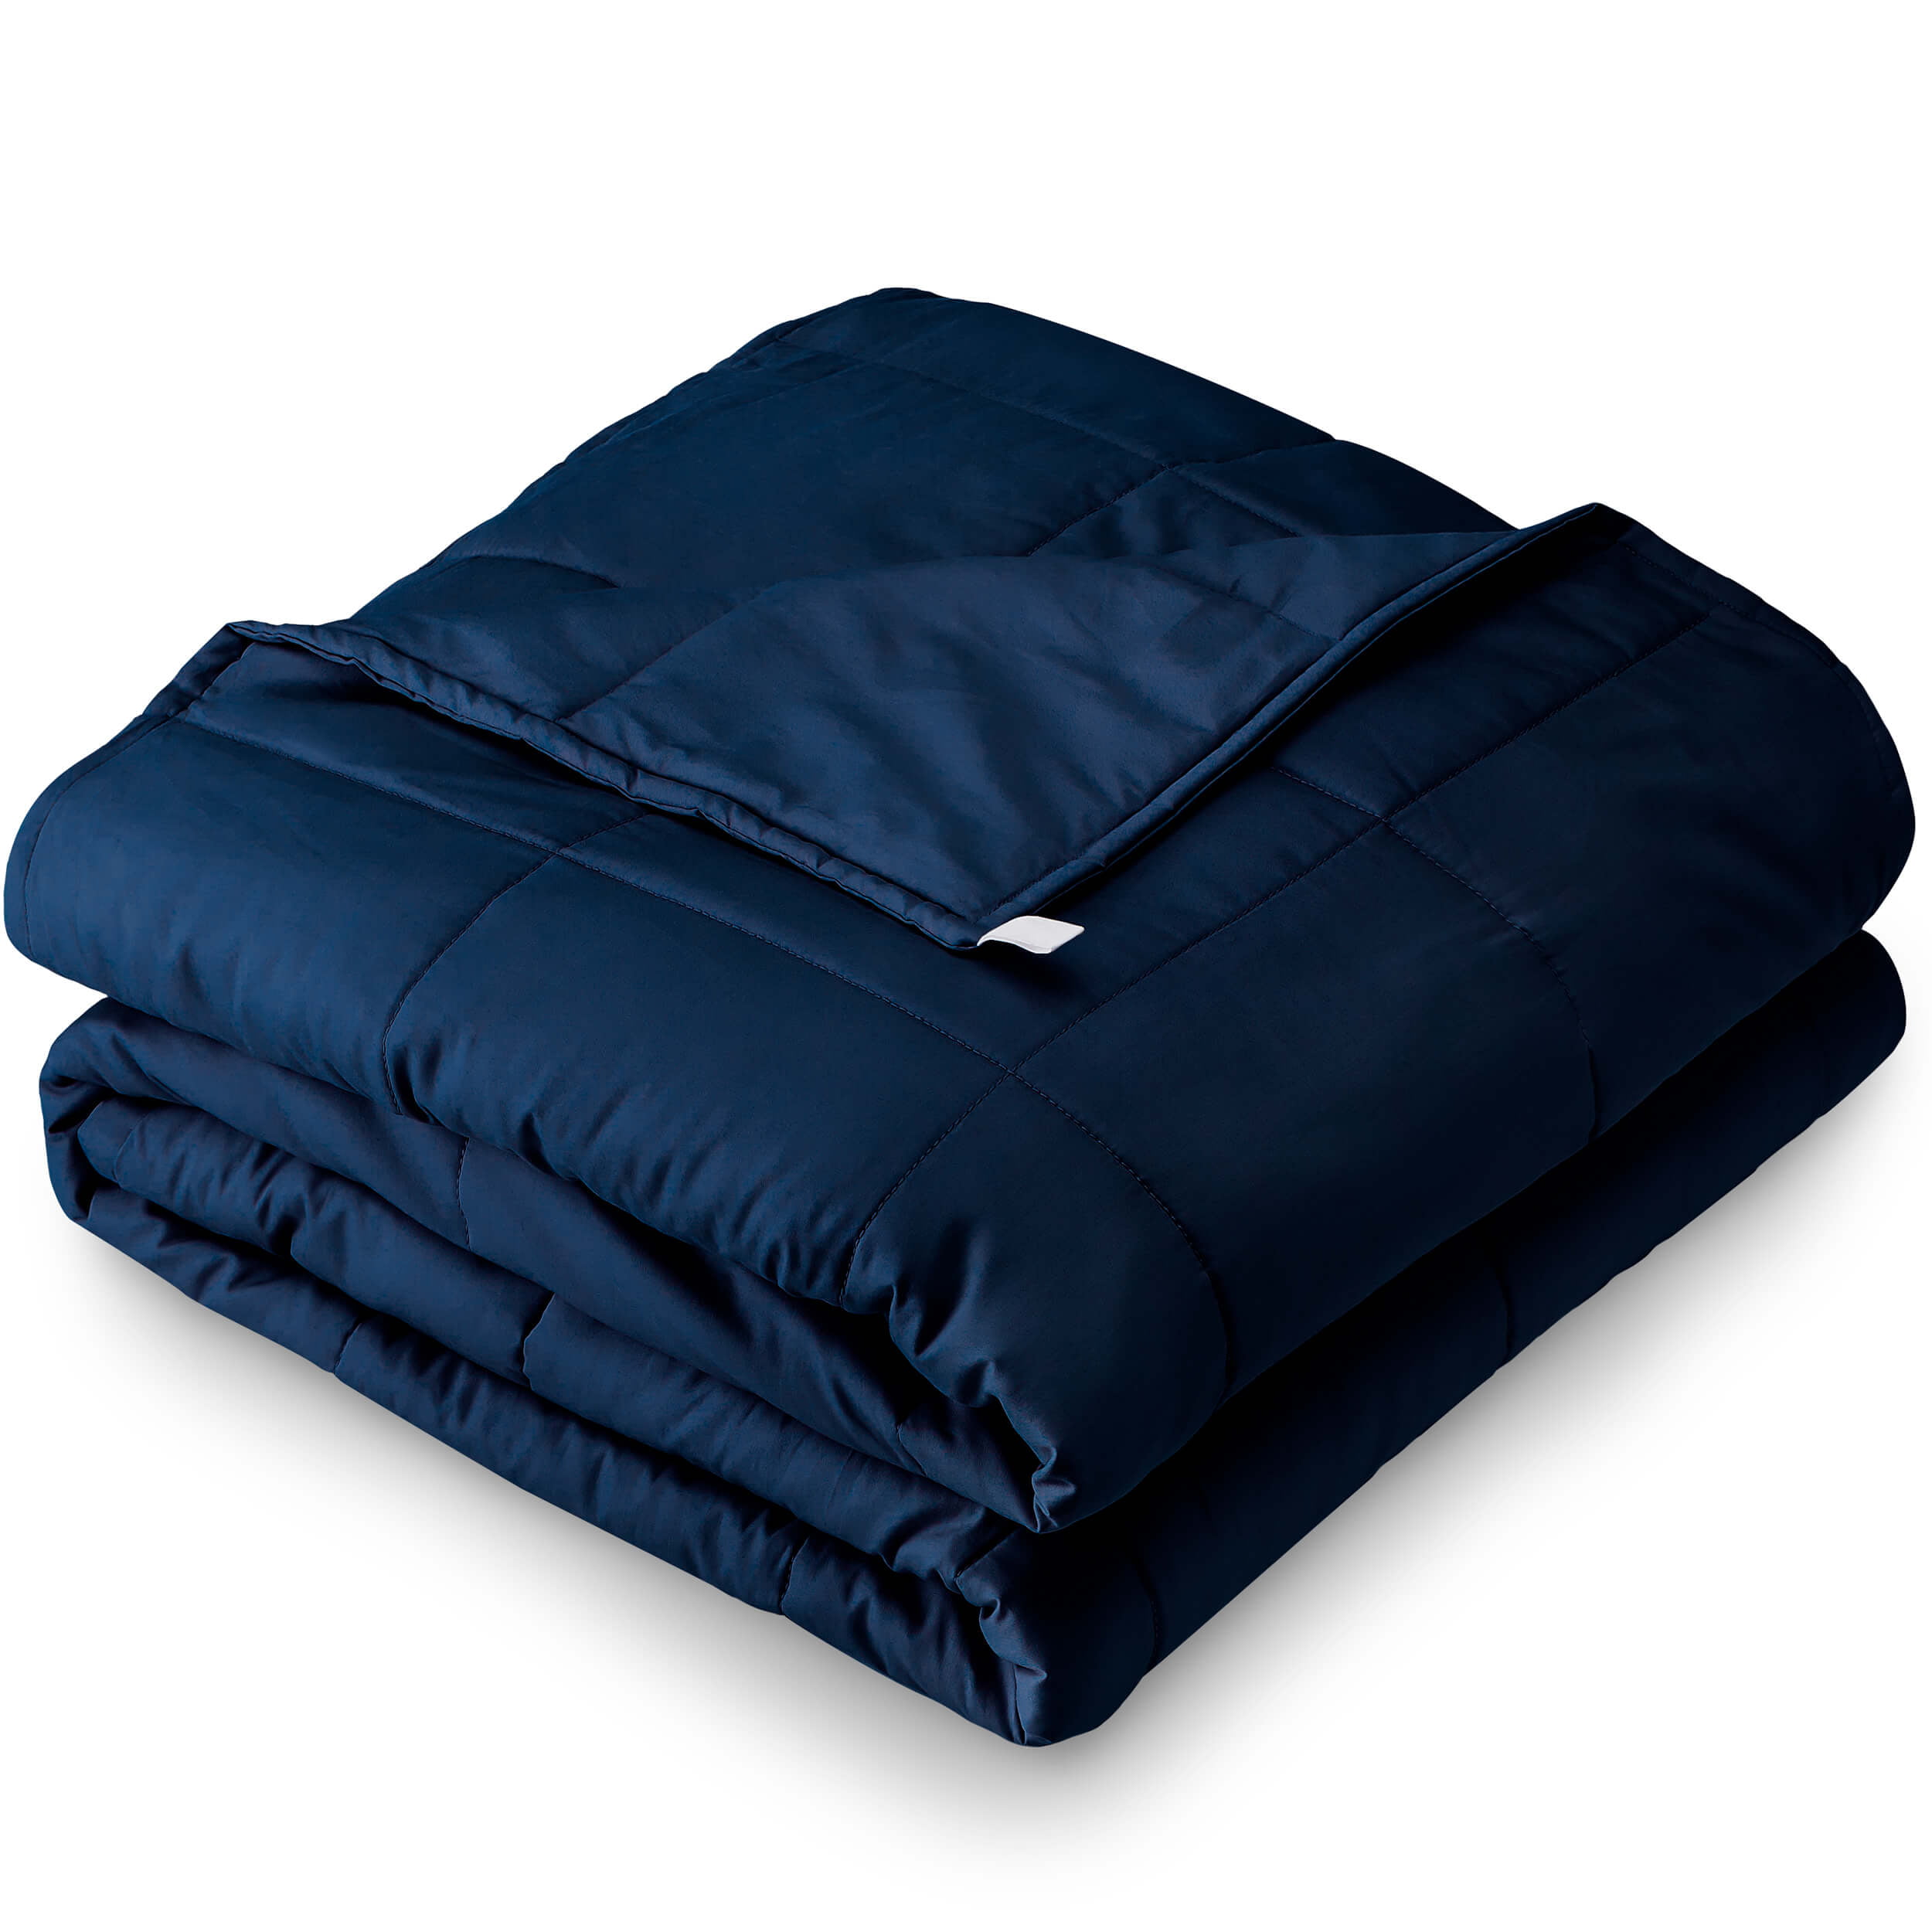 Bare Home Weighted Blanket (60"x80", 17lb, Dark Blue) Standard Size